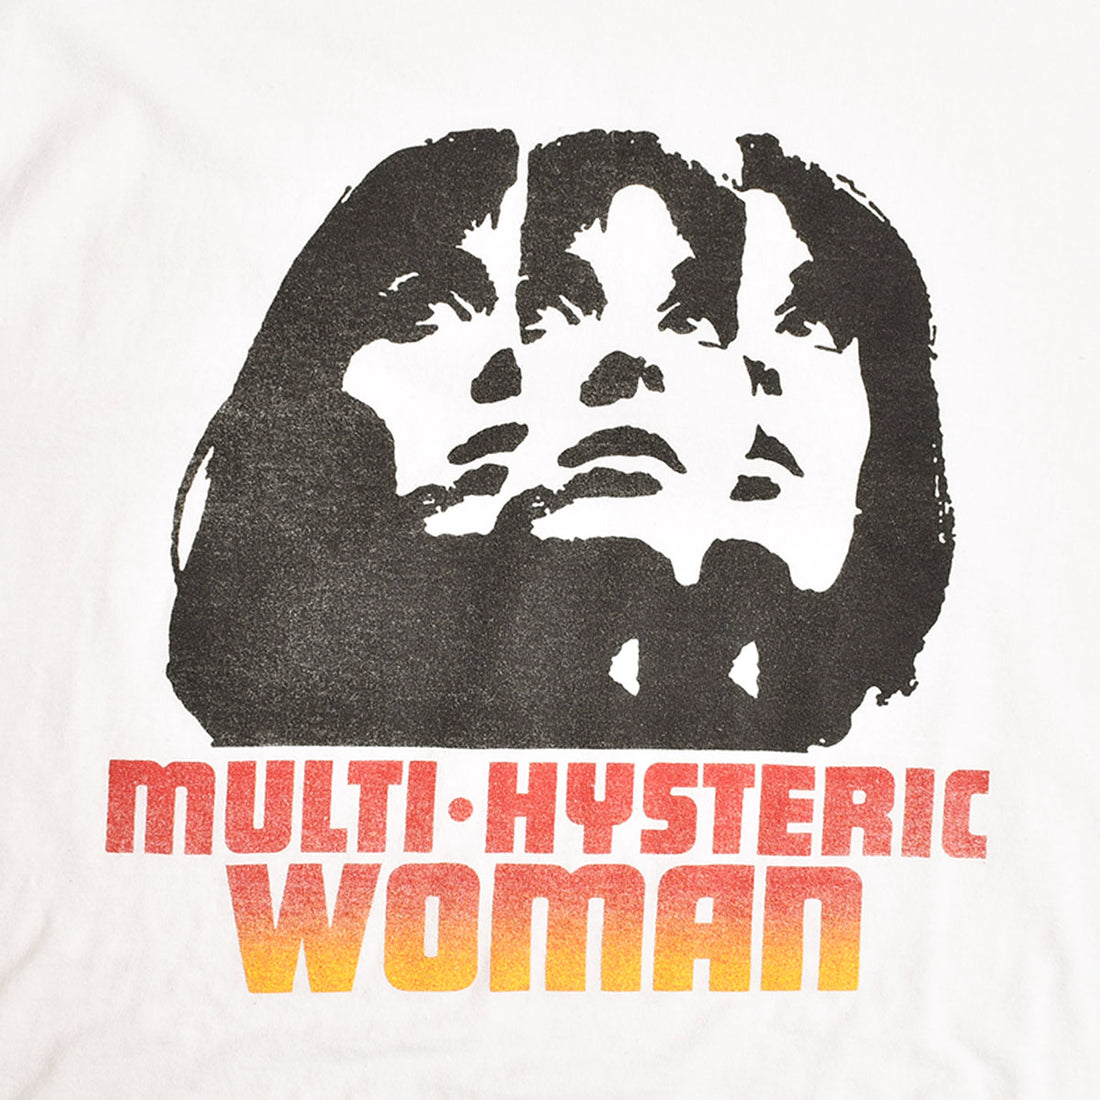 [HYSTERIC GLAMOUR]MULTI HYSTERIC WOMAN Tシャツ/WHITE(02241CT01)